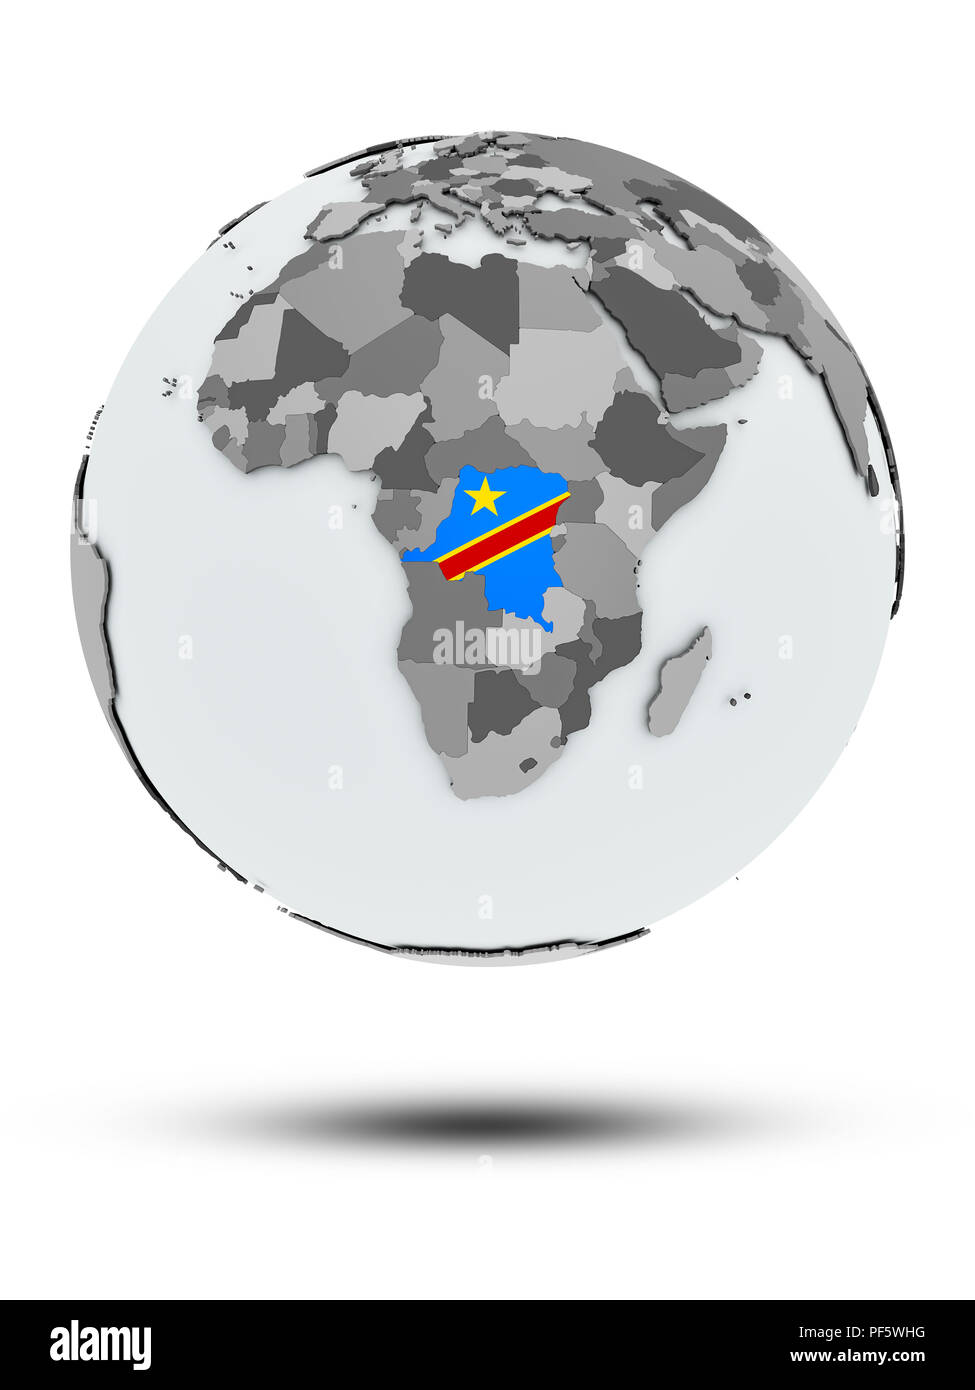 Democratic Republic of Congo with flag on globe with shadow isolated on white background. 3D illustration. Stock Photo